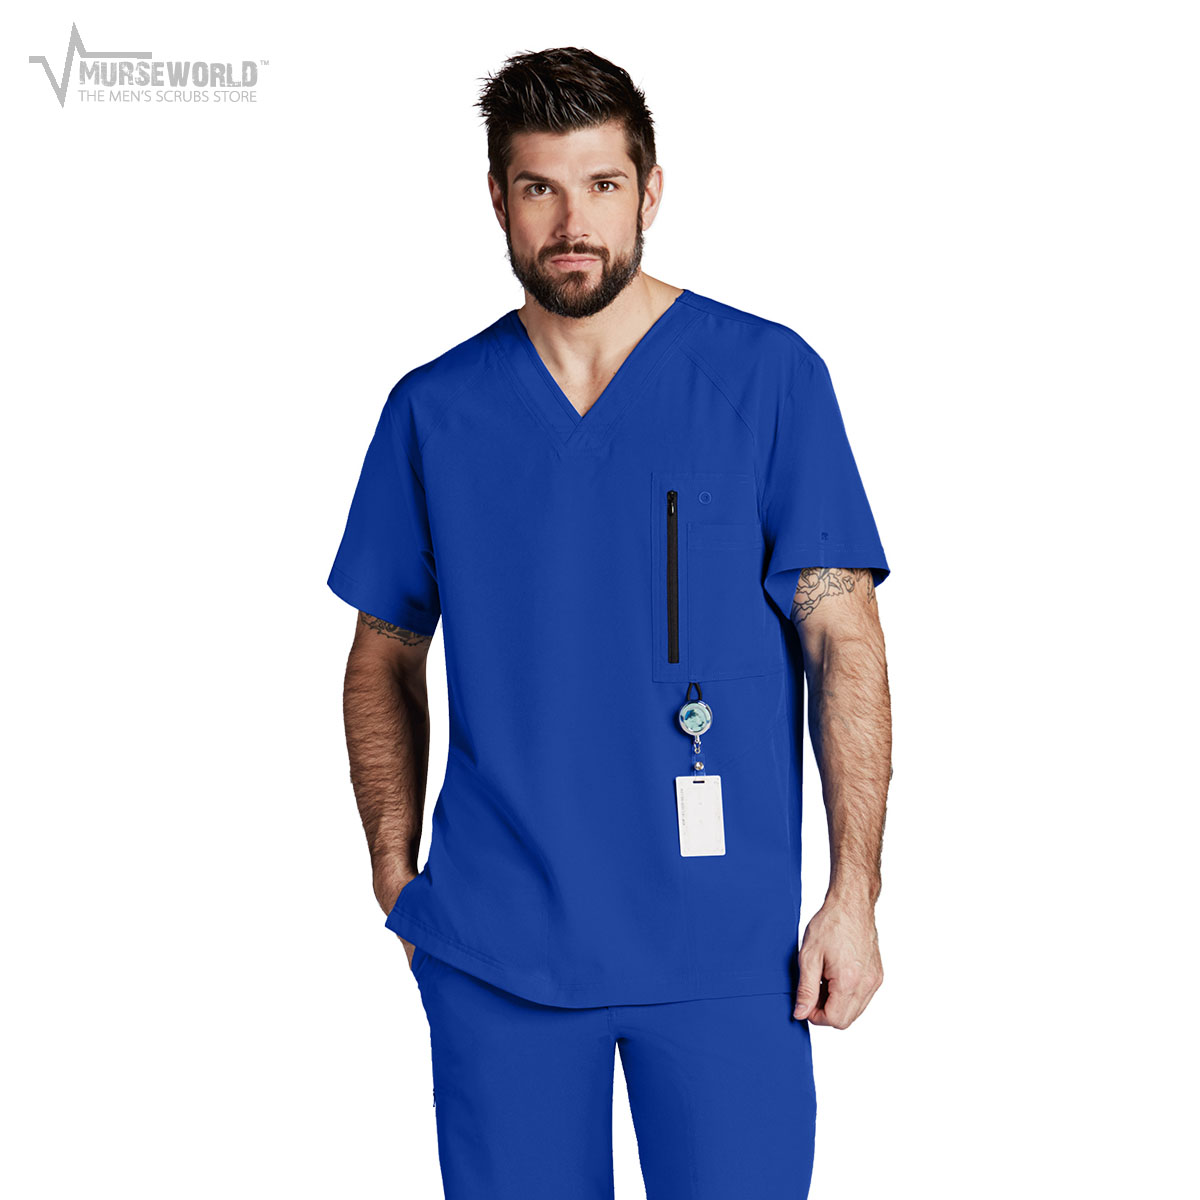 Barco One Men's Athletic Scrub Top with Zipper Pocket - B115